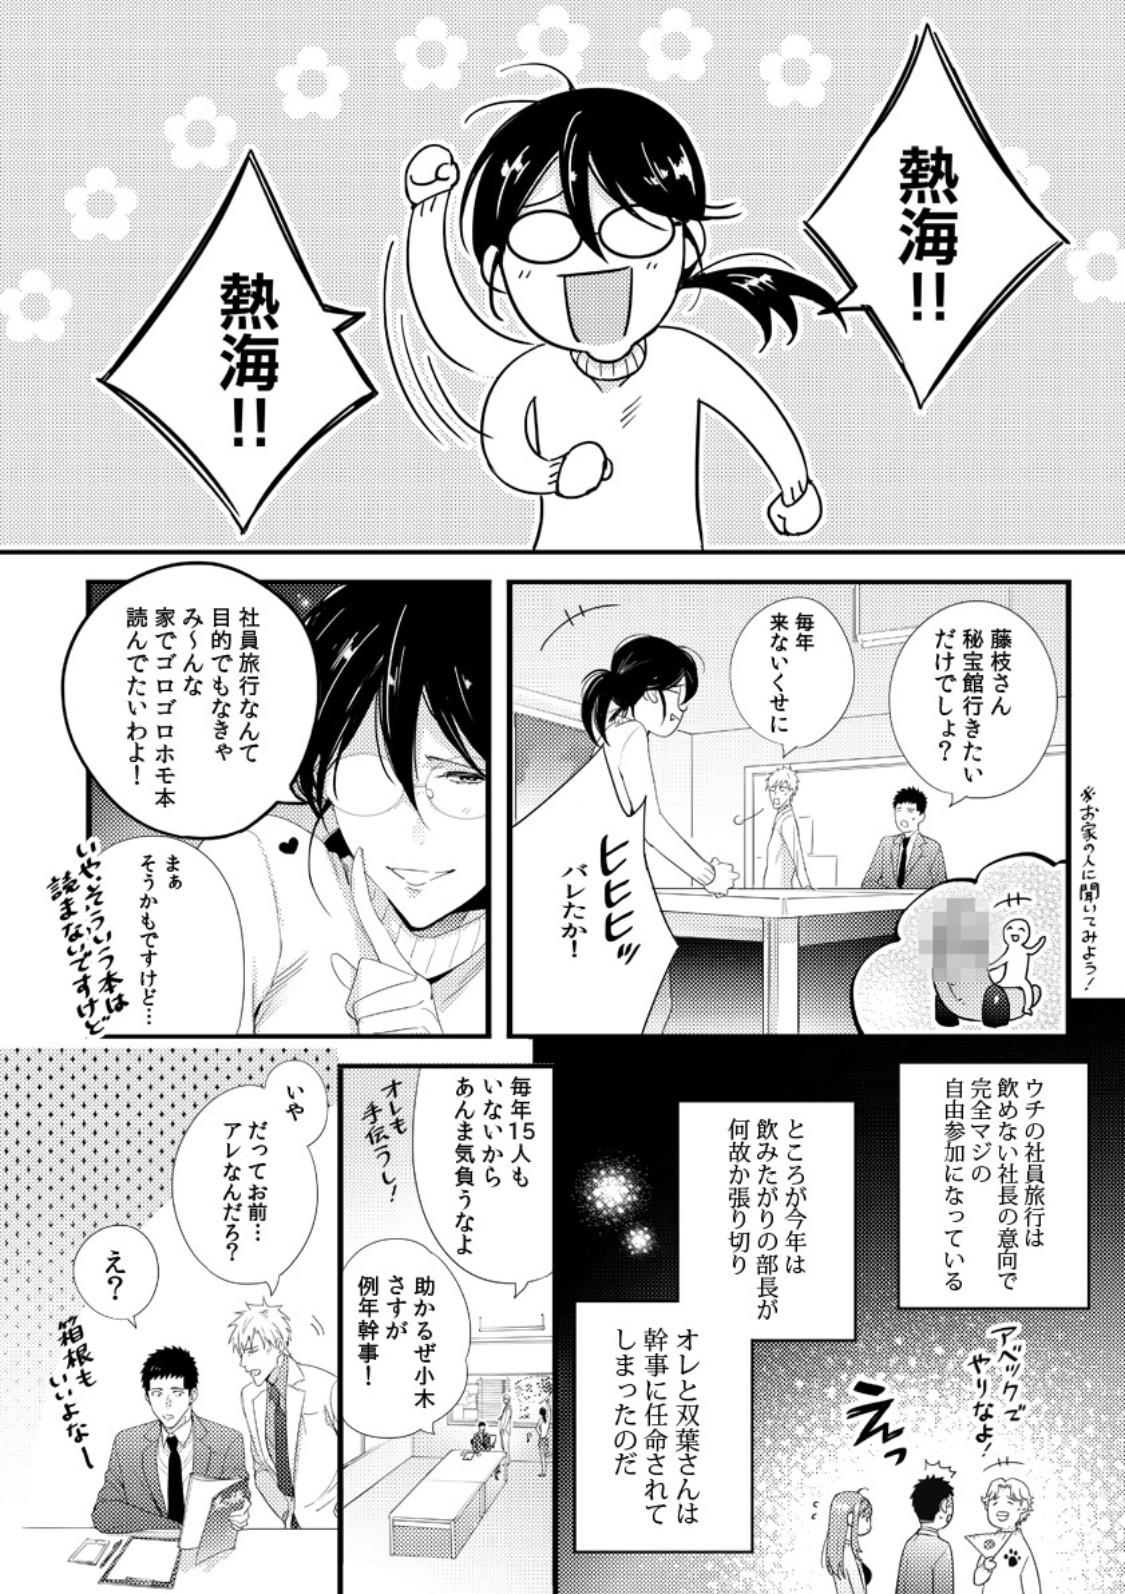 Please Let Me Hold You Futaba-San! Ch. 1+2 3